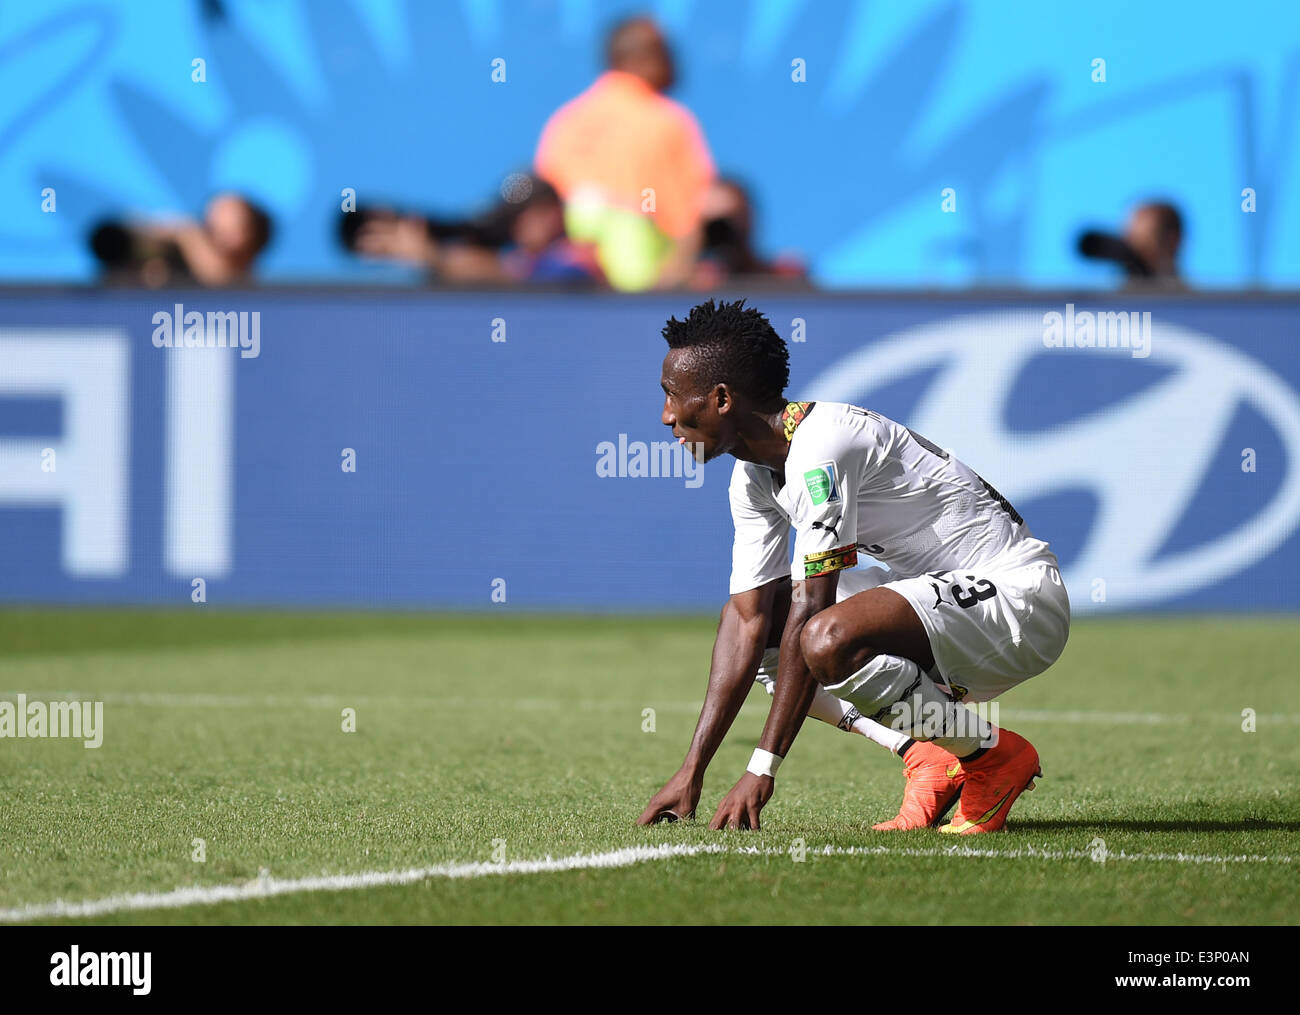 Brasilia, Brazil. 26th June, 2014. Harrison Afful of Ghana reacts during the FIFA World Cup 2014 group G preliminary round match between Portugal and Ghana at the Estadio National Stadium in Brasilia, Brazil, on 26 June 2014 Credit: © dpa picture alliance/Alamy Live News  Stock Photo